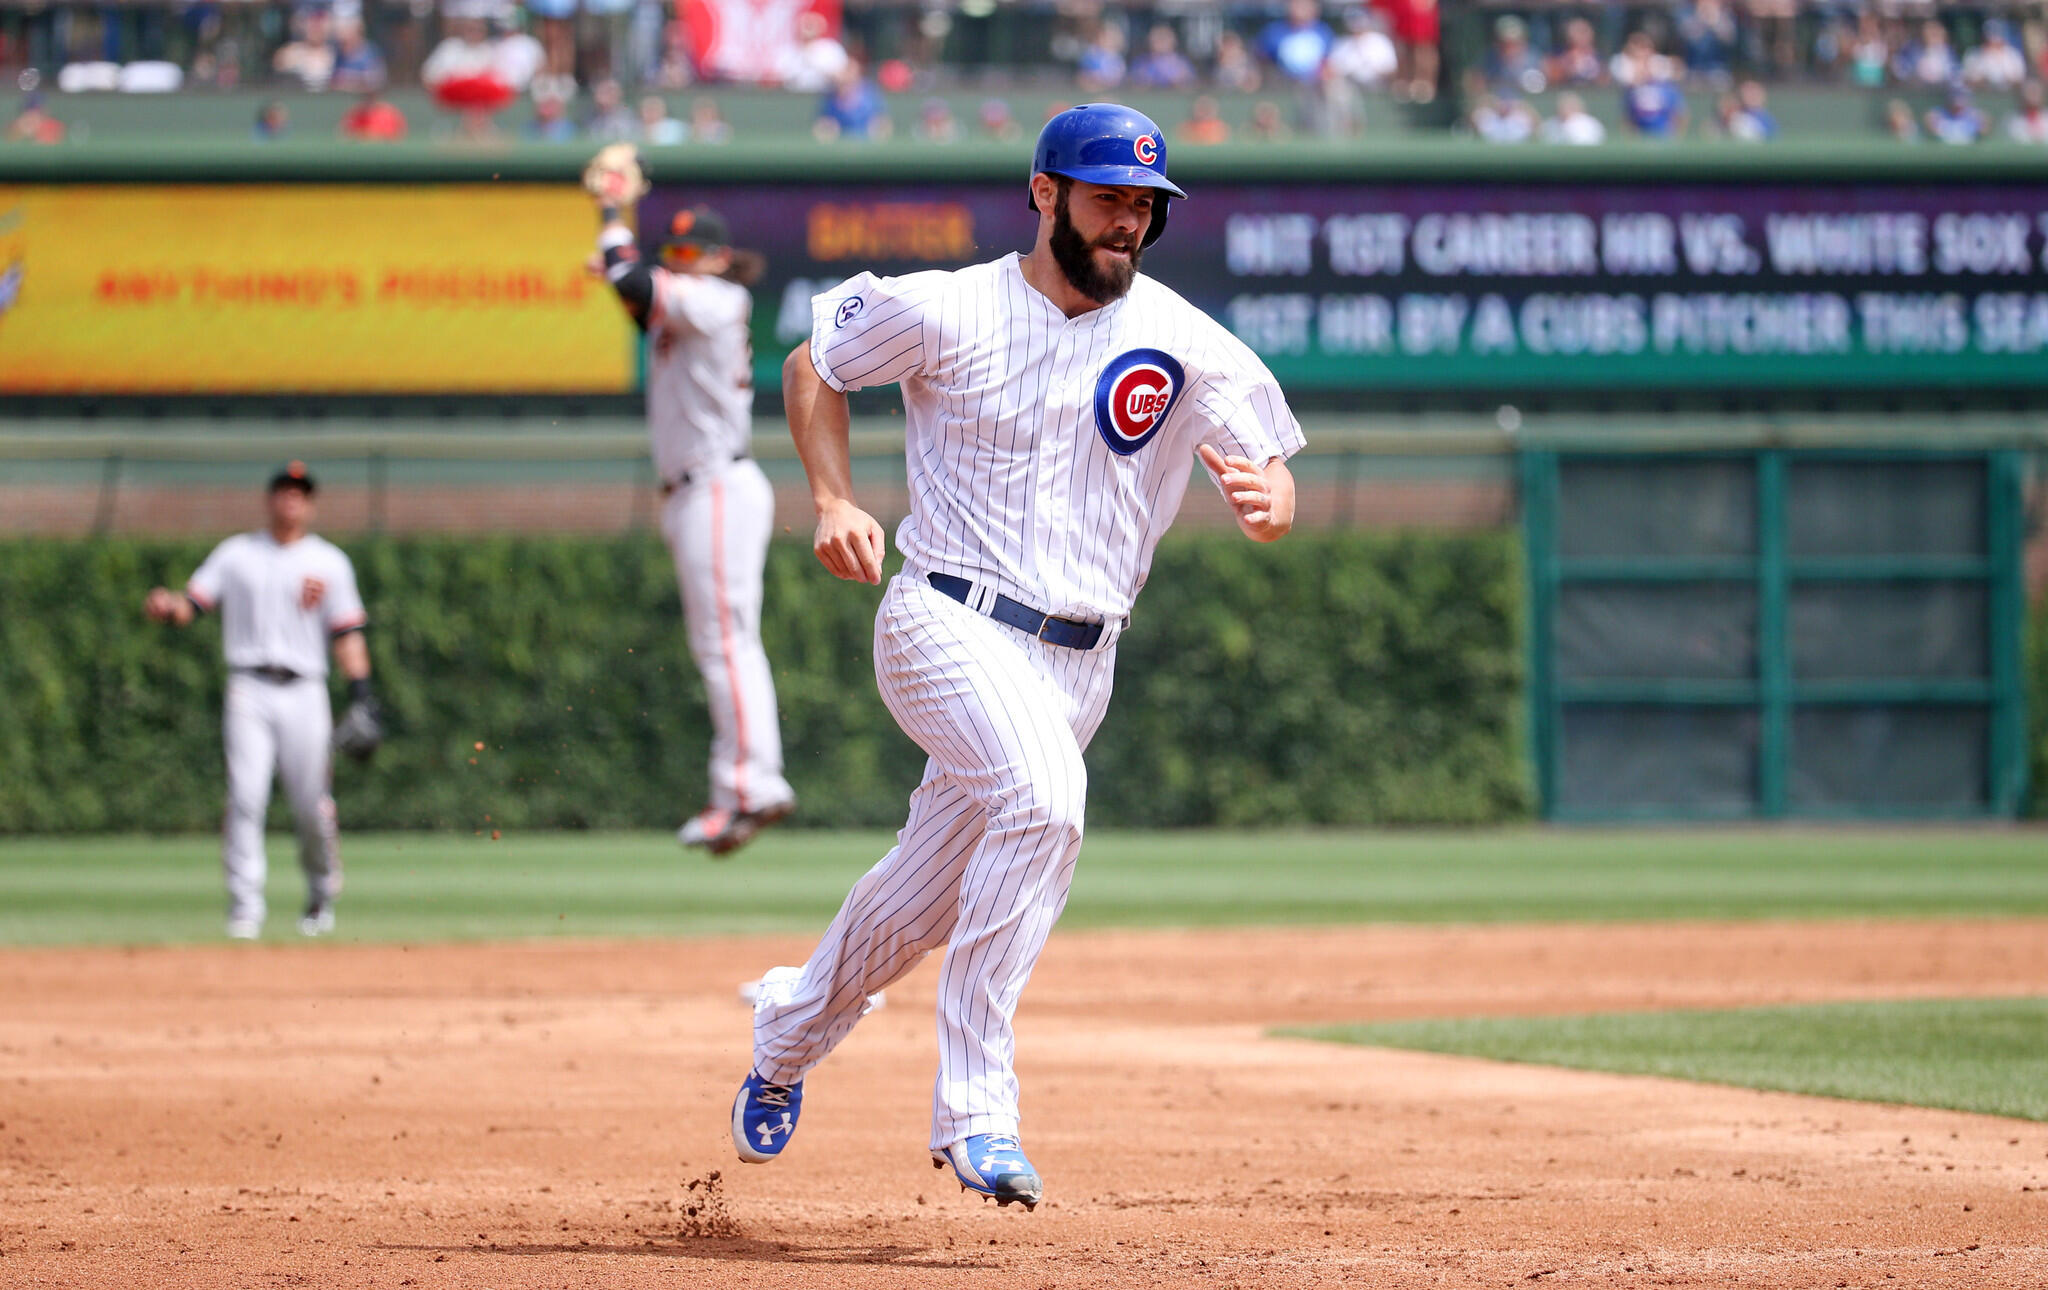 Jake Arrieta triples against the Giants in the second inning.